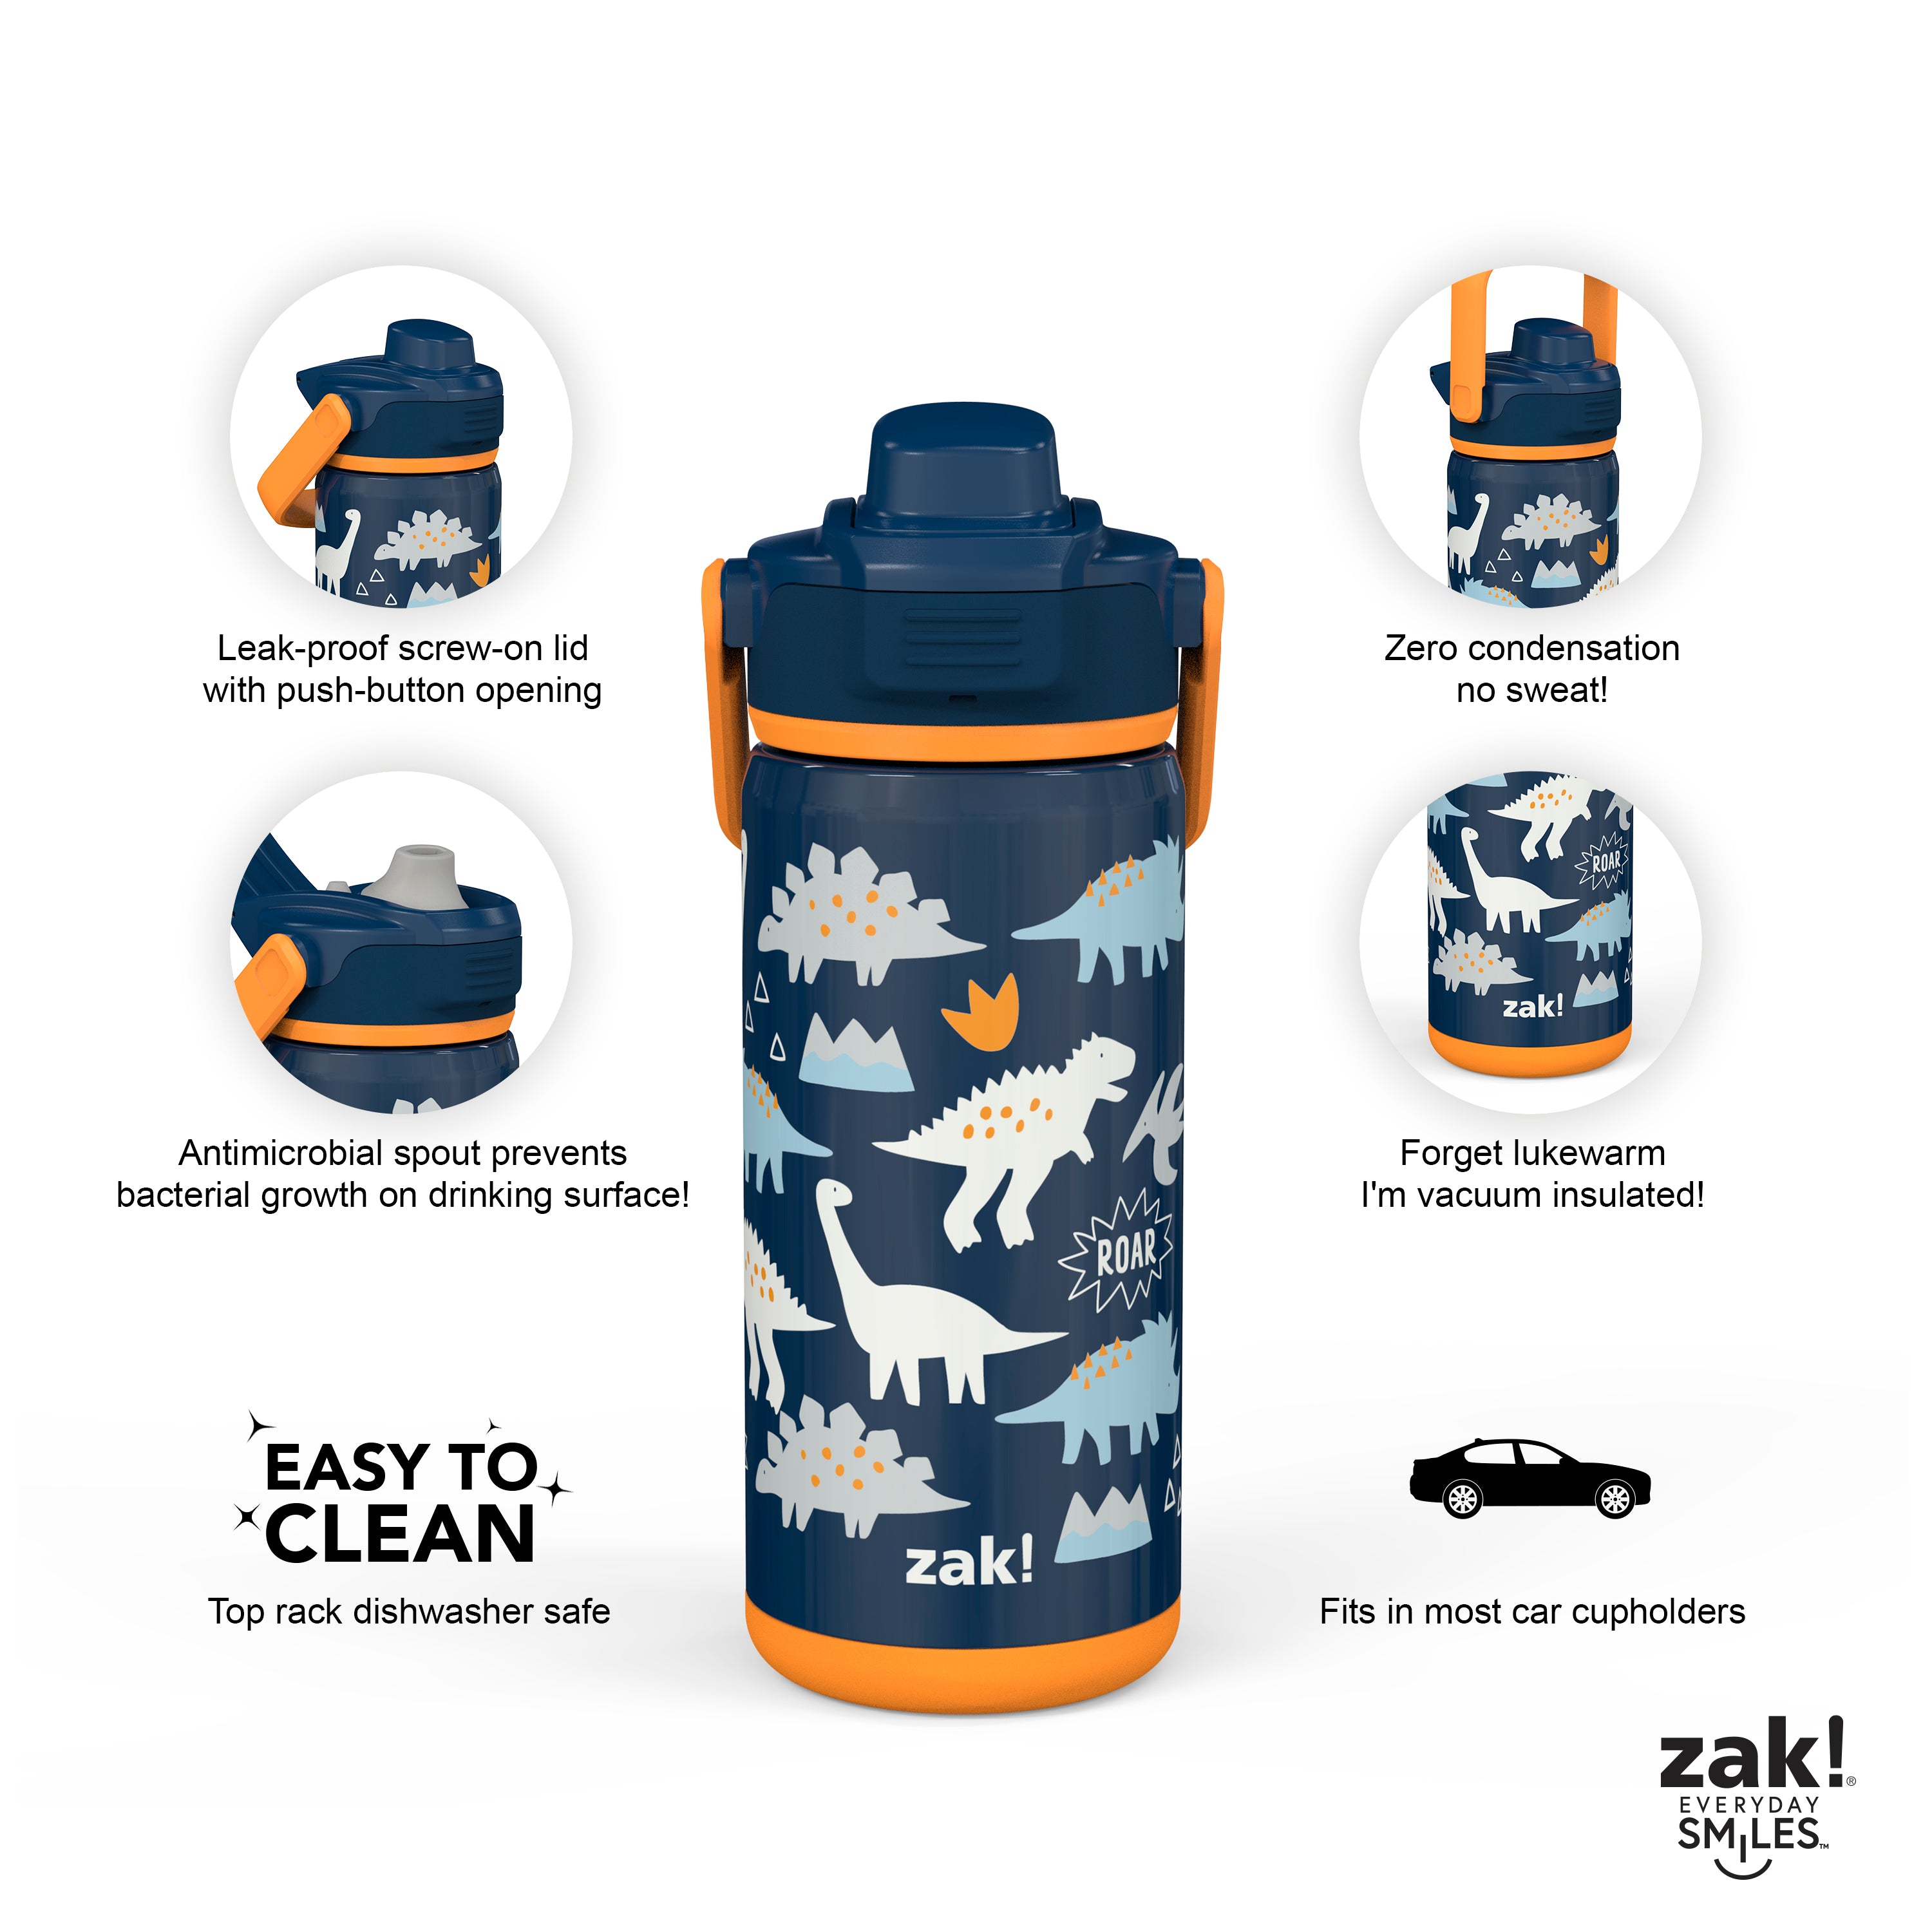 Beacon Stainless Steel Insulated Kids Water Bottle with Covered Spout - Zaksaurus, 14 Ounces